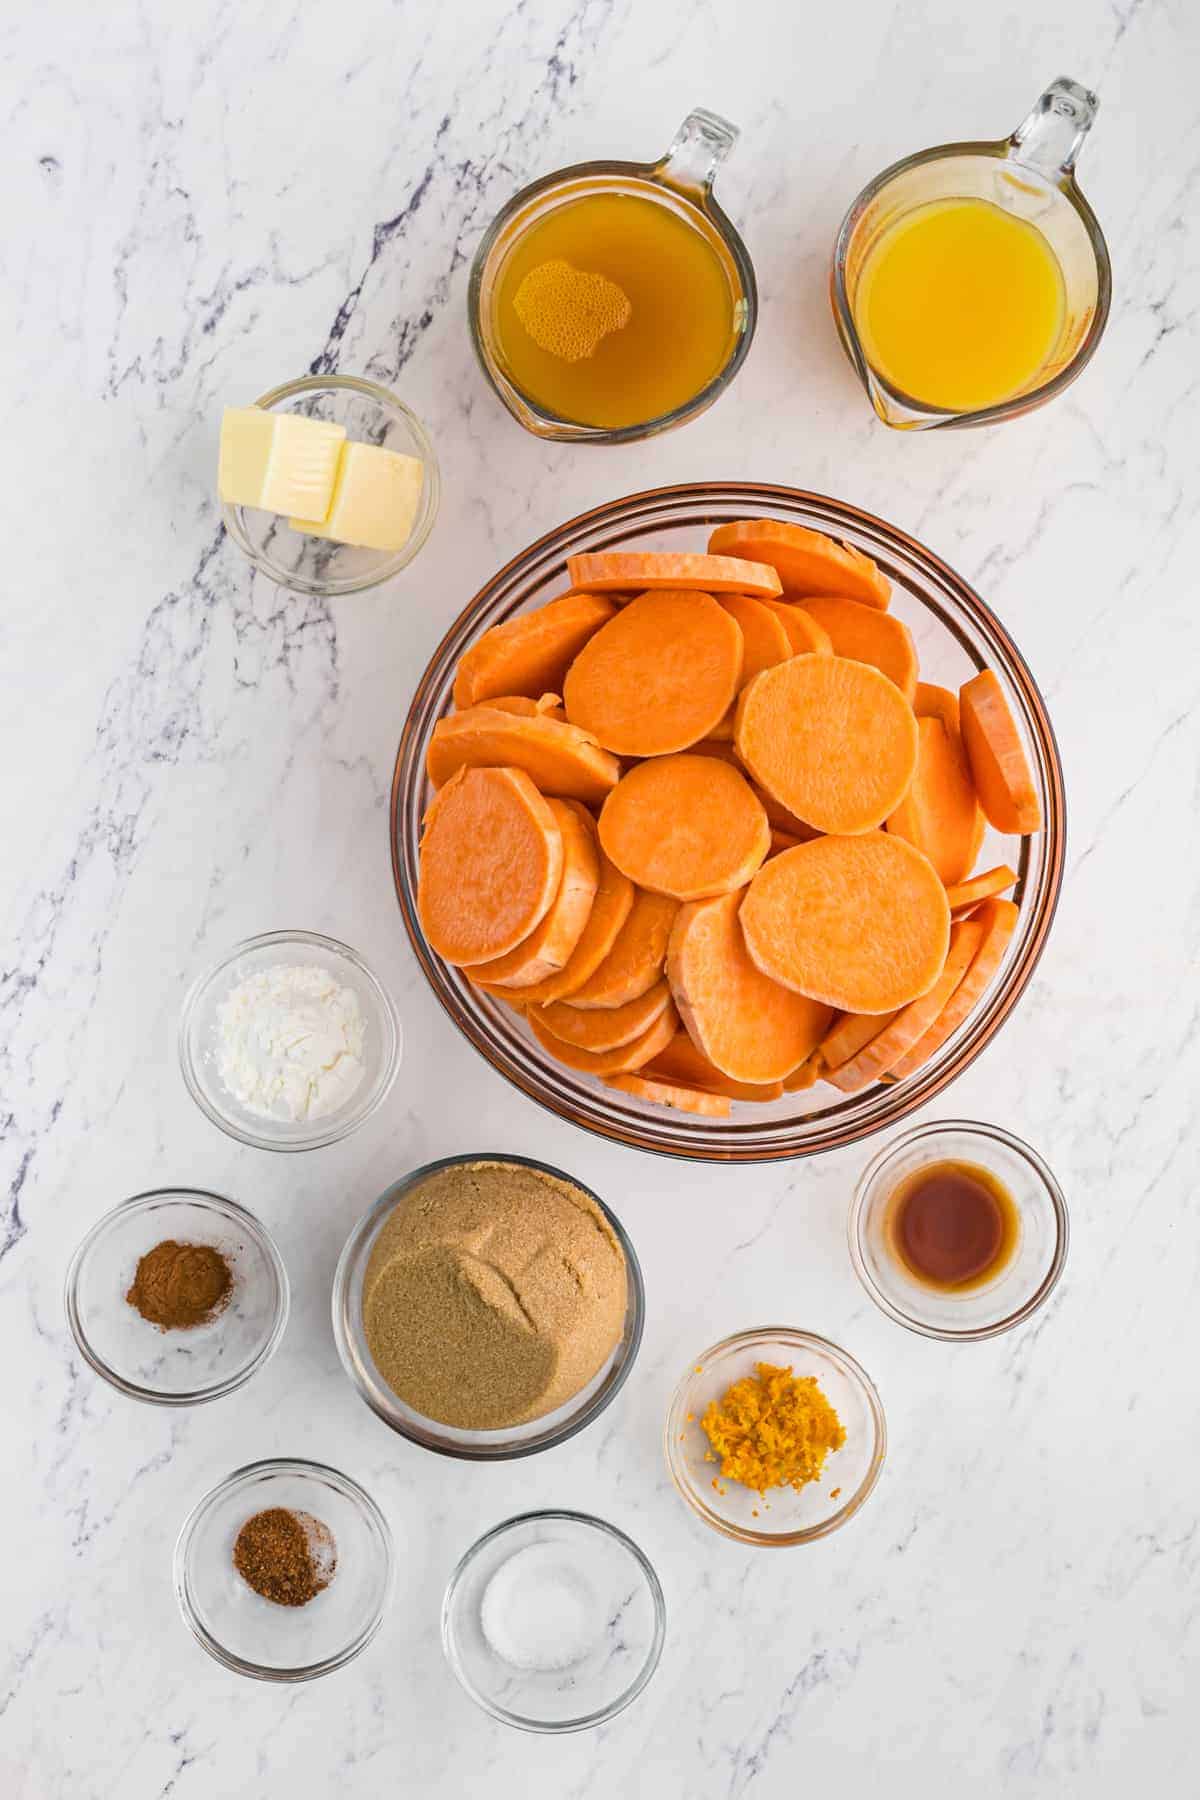 Ingredients to make baked candied yams in small bowls on a white surface